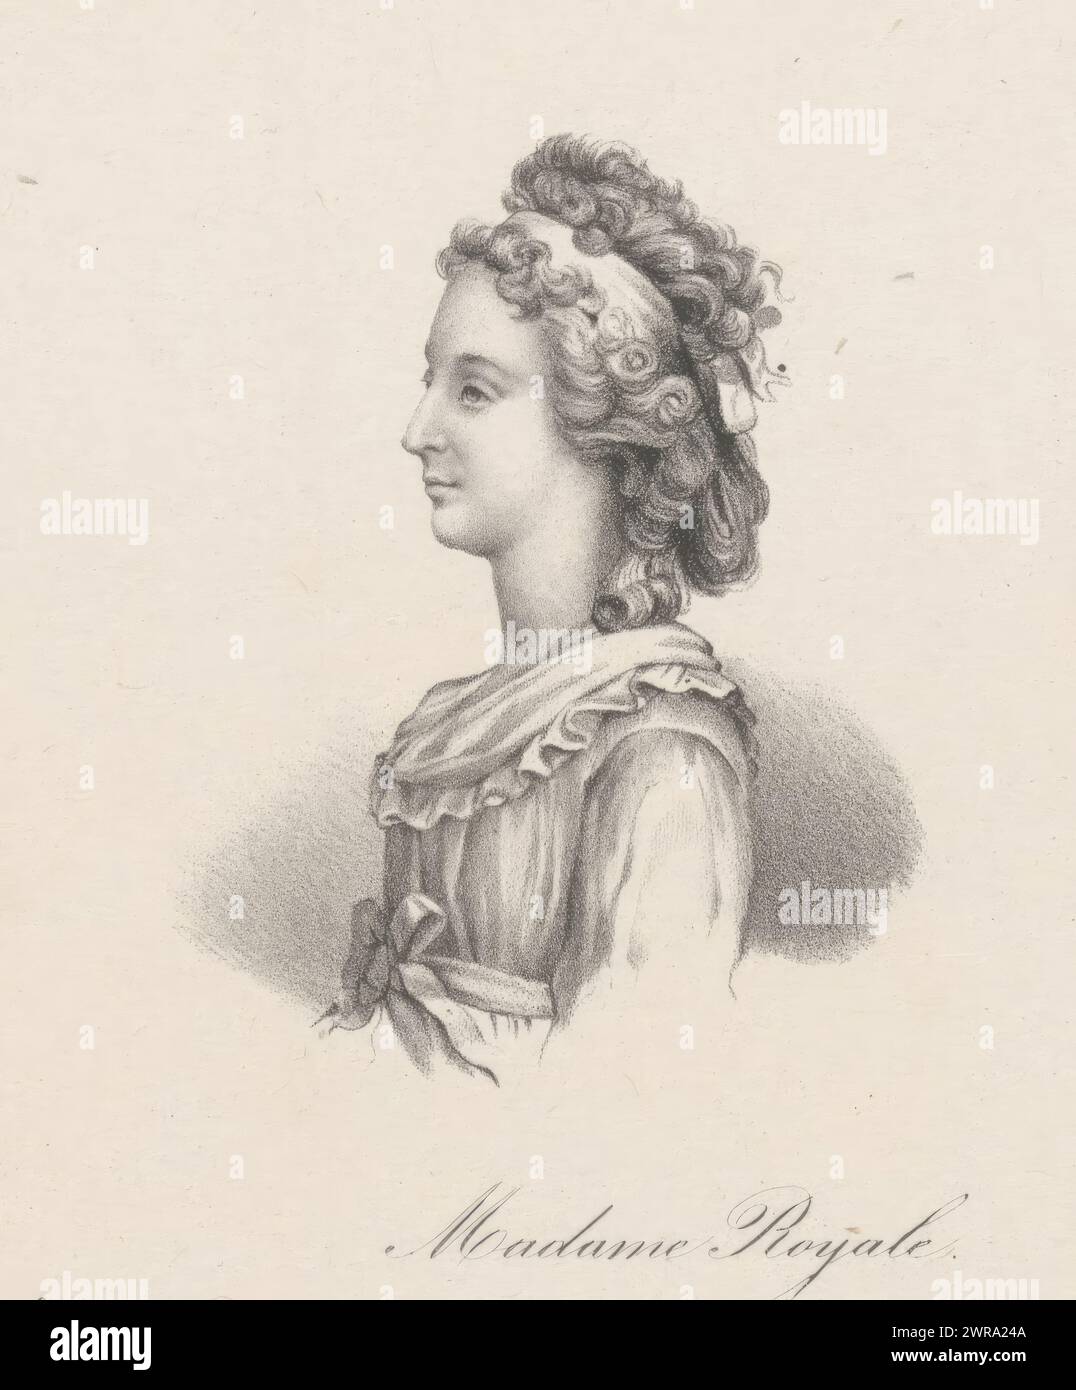 Portrait of Marie Thérèse Charlotte of France, Madame Royale (title on object), print maker: anonymous, printer: veuve Delpech (Naudet), (possibly), Paris, in or after 1818 - in or before 1842, paper, height 278 mm × width 183 mm, print Stock Photo